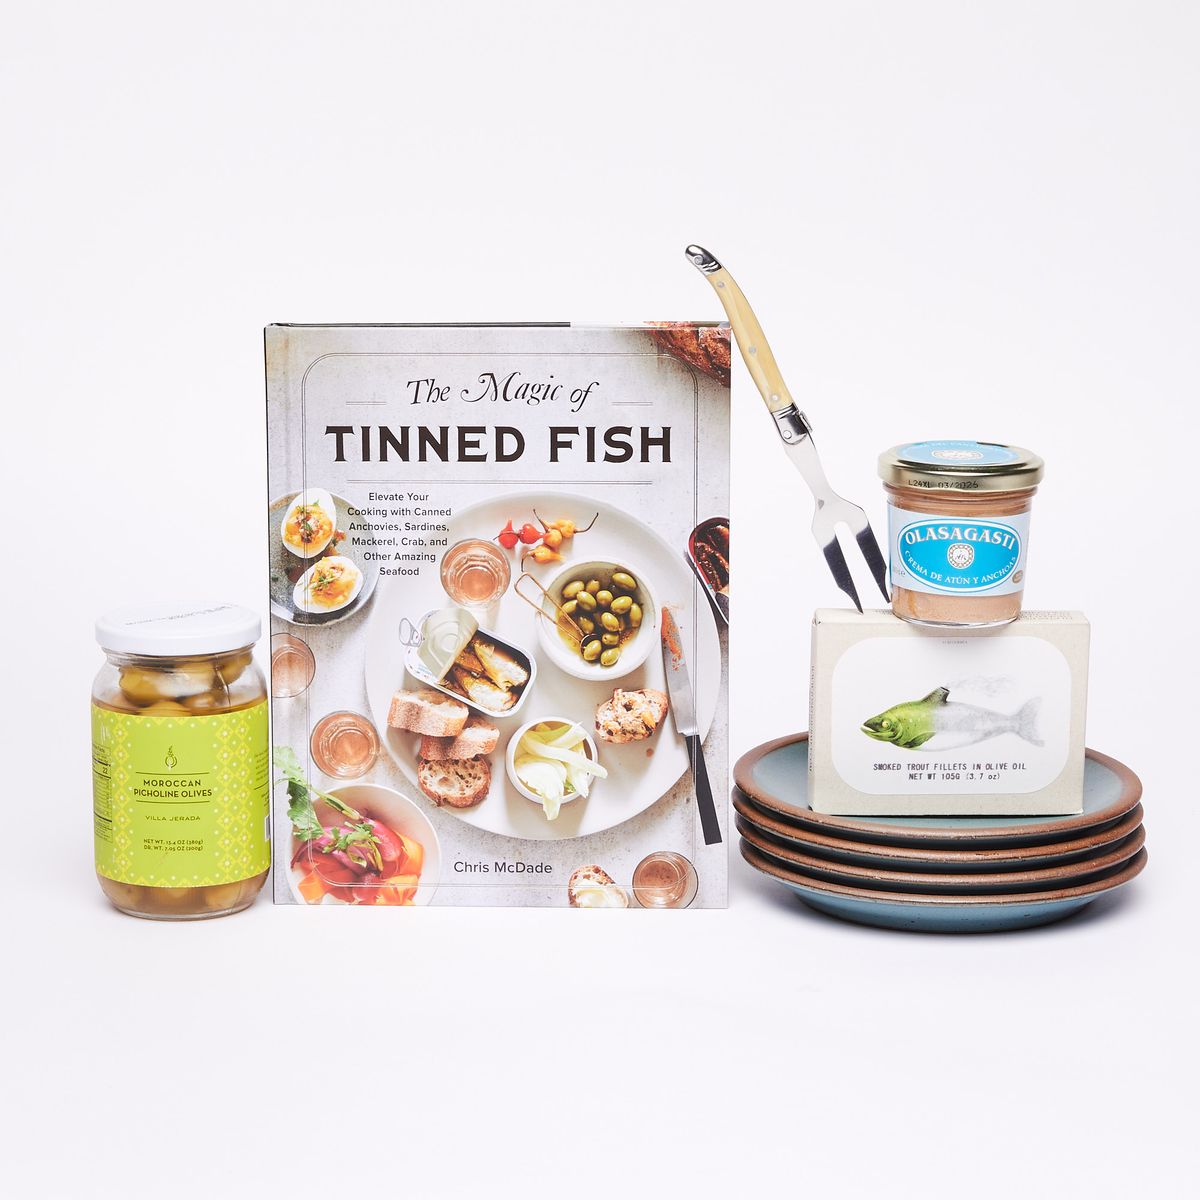 From left to right: Clear jar of olives with green and yellow label with white top, bookcover that reads "The Magic of Tinned Fish", an ornate two-pronged fork, four turquoise cake plates, a box with a picture of a fish, a glass jar with a white and blue label